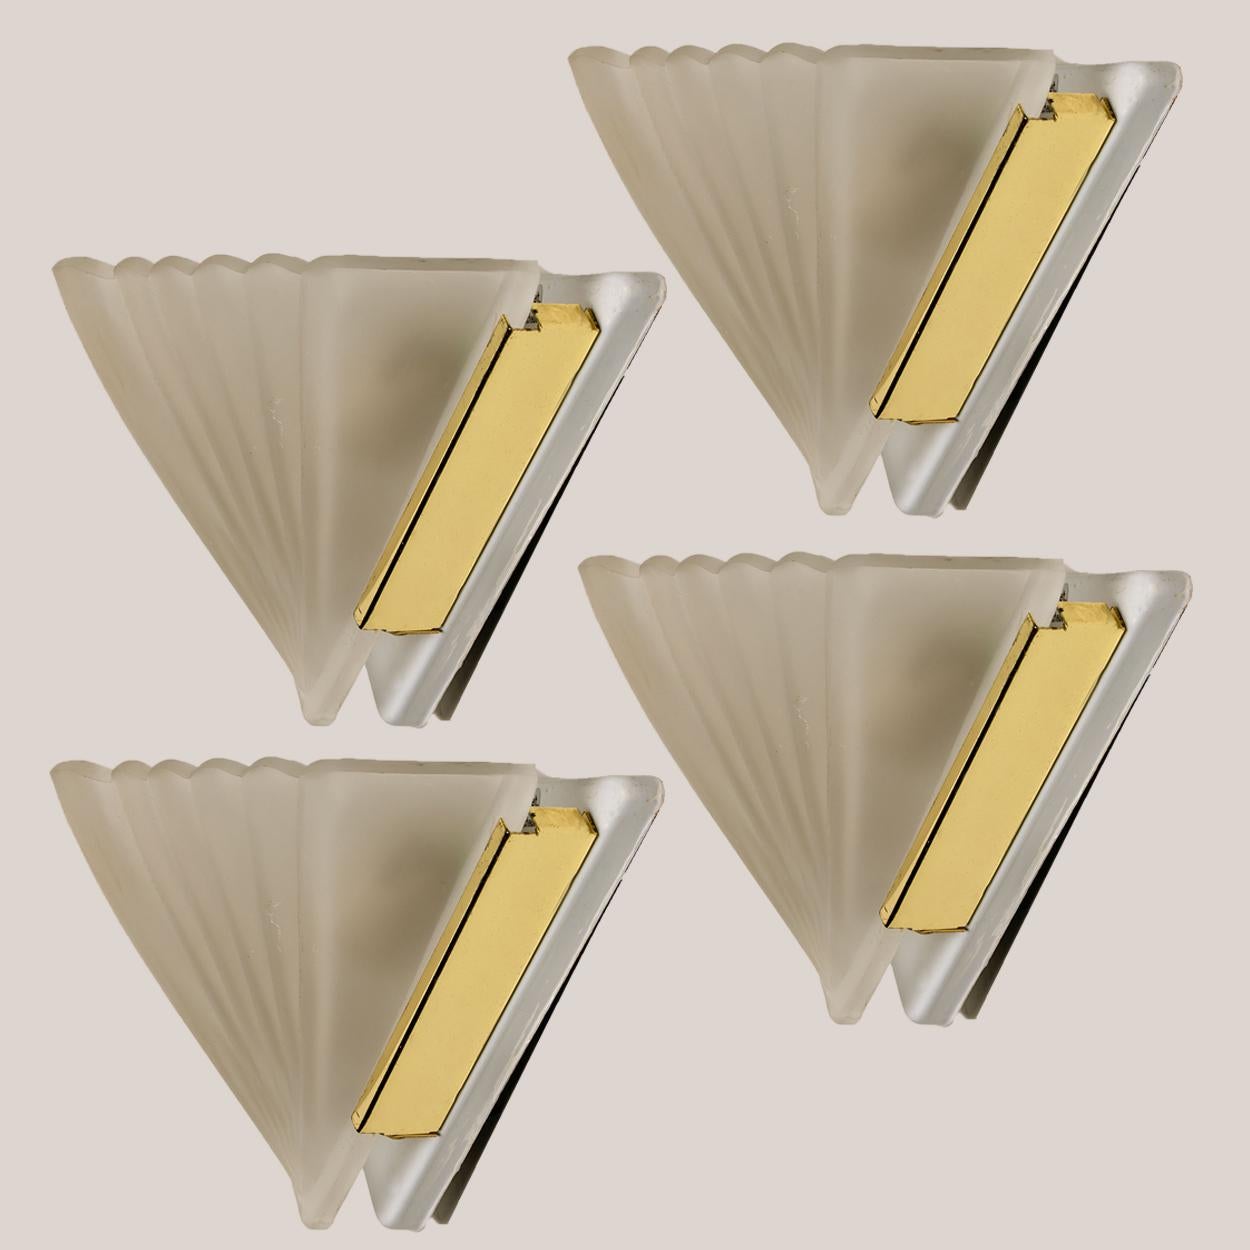 Triangle shaped wall sconces in Art Deco style. The lights are made of thick white milkglass on a white backplate with brass details.

Minimalistic design executed with a taste for excellence in craftsmanship. Good cleaned in very good vintage